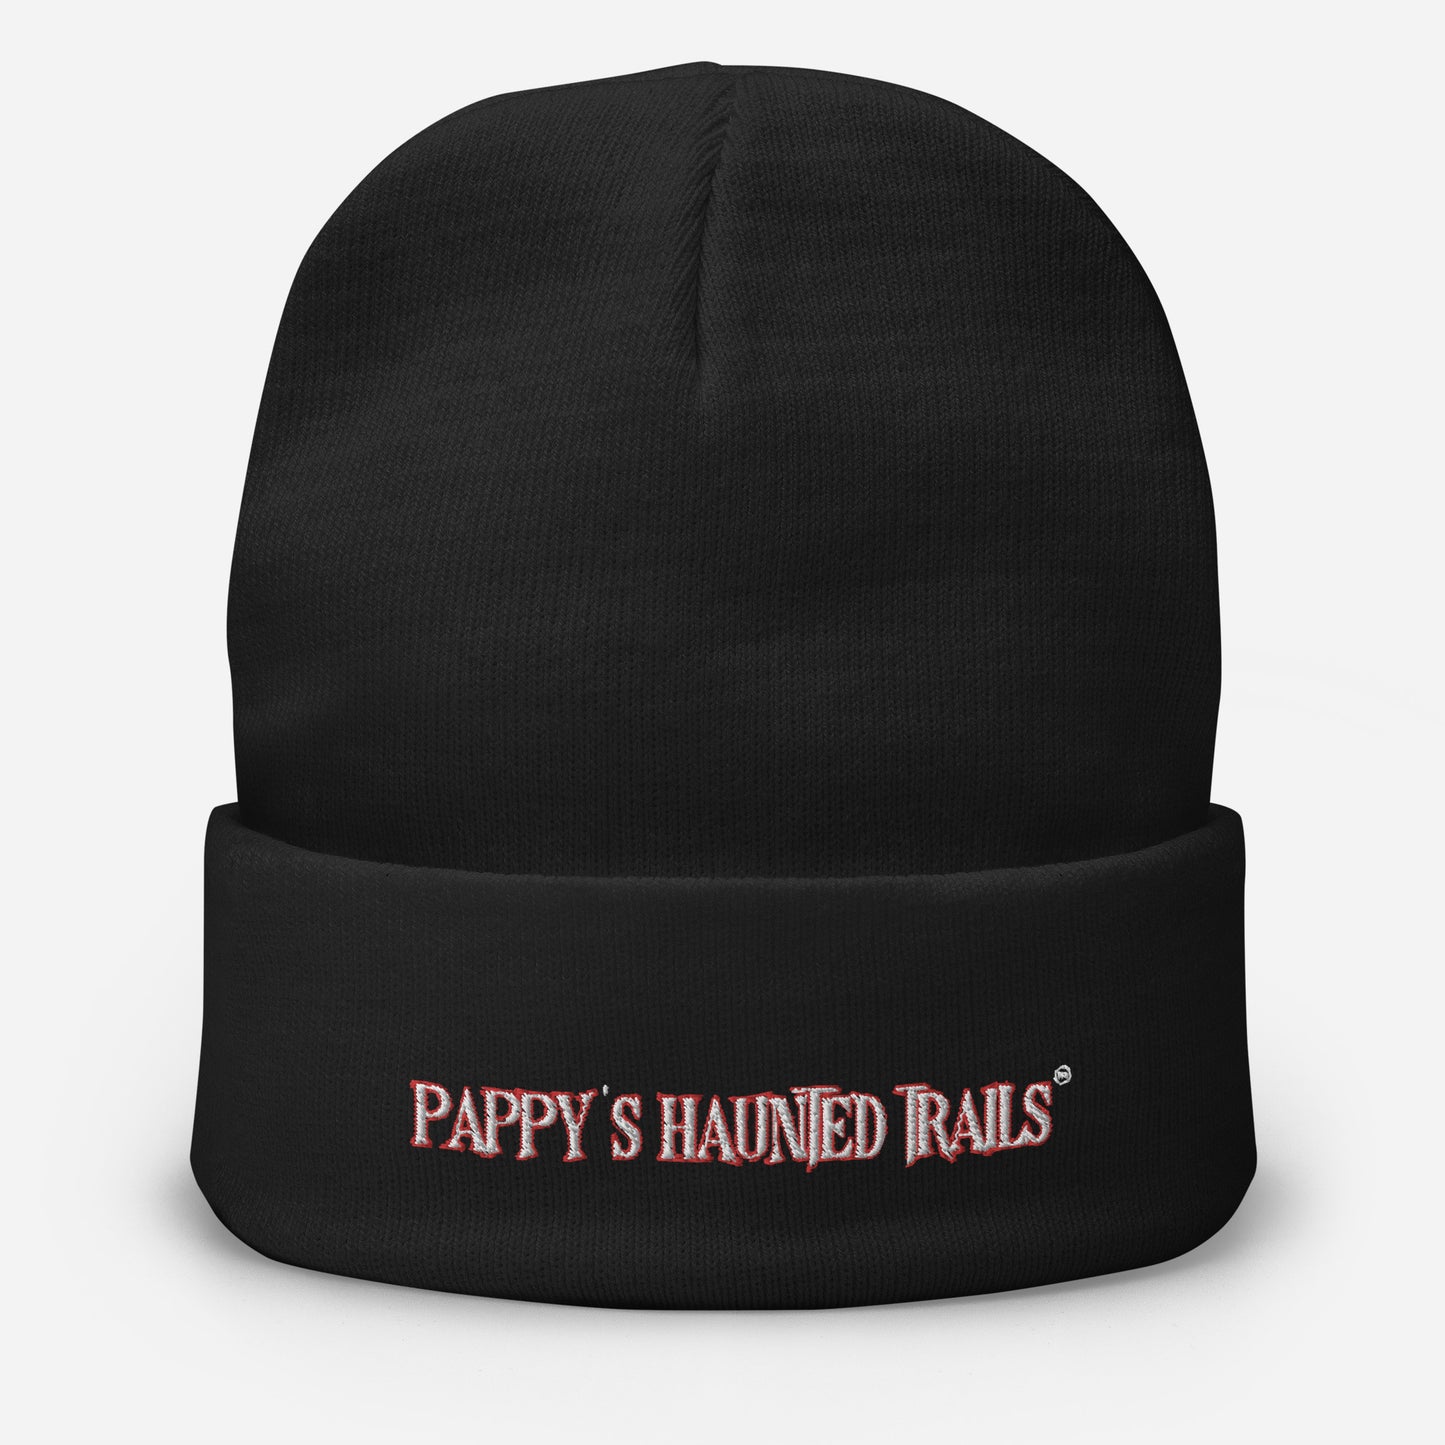 Pappy's Haunted Trails Embroidered Beanie